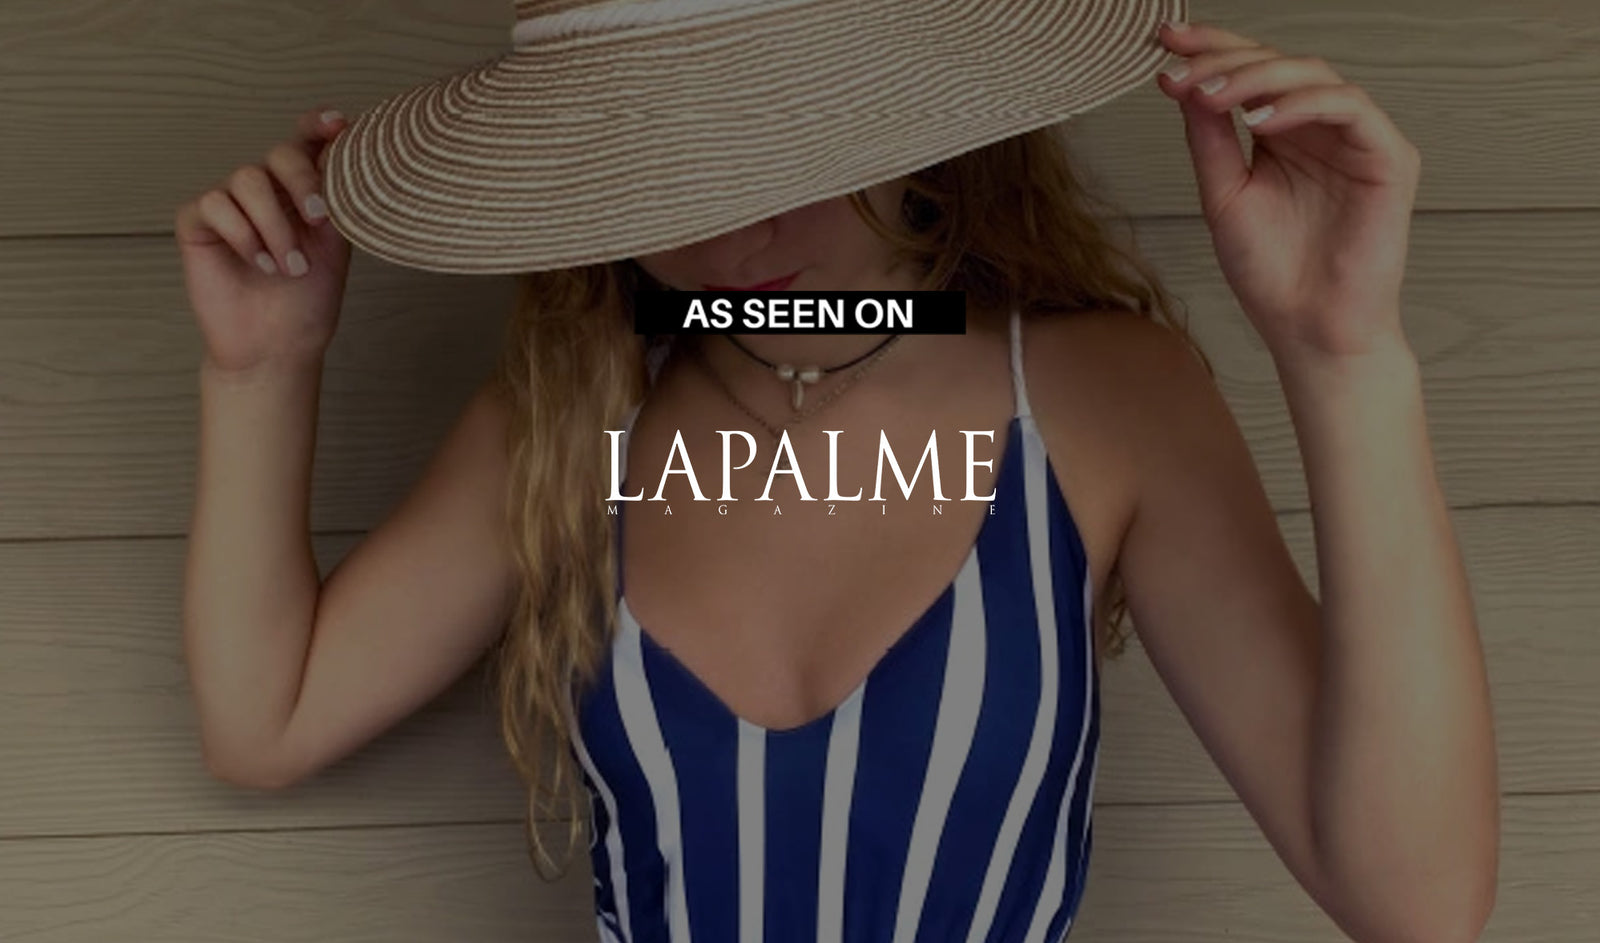 As seen on Lapalme Magazine | Sustainable Swimwear Has A New Name